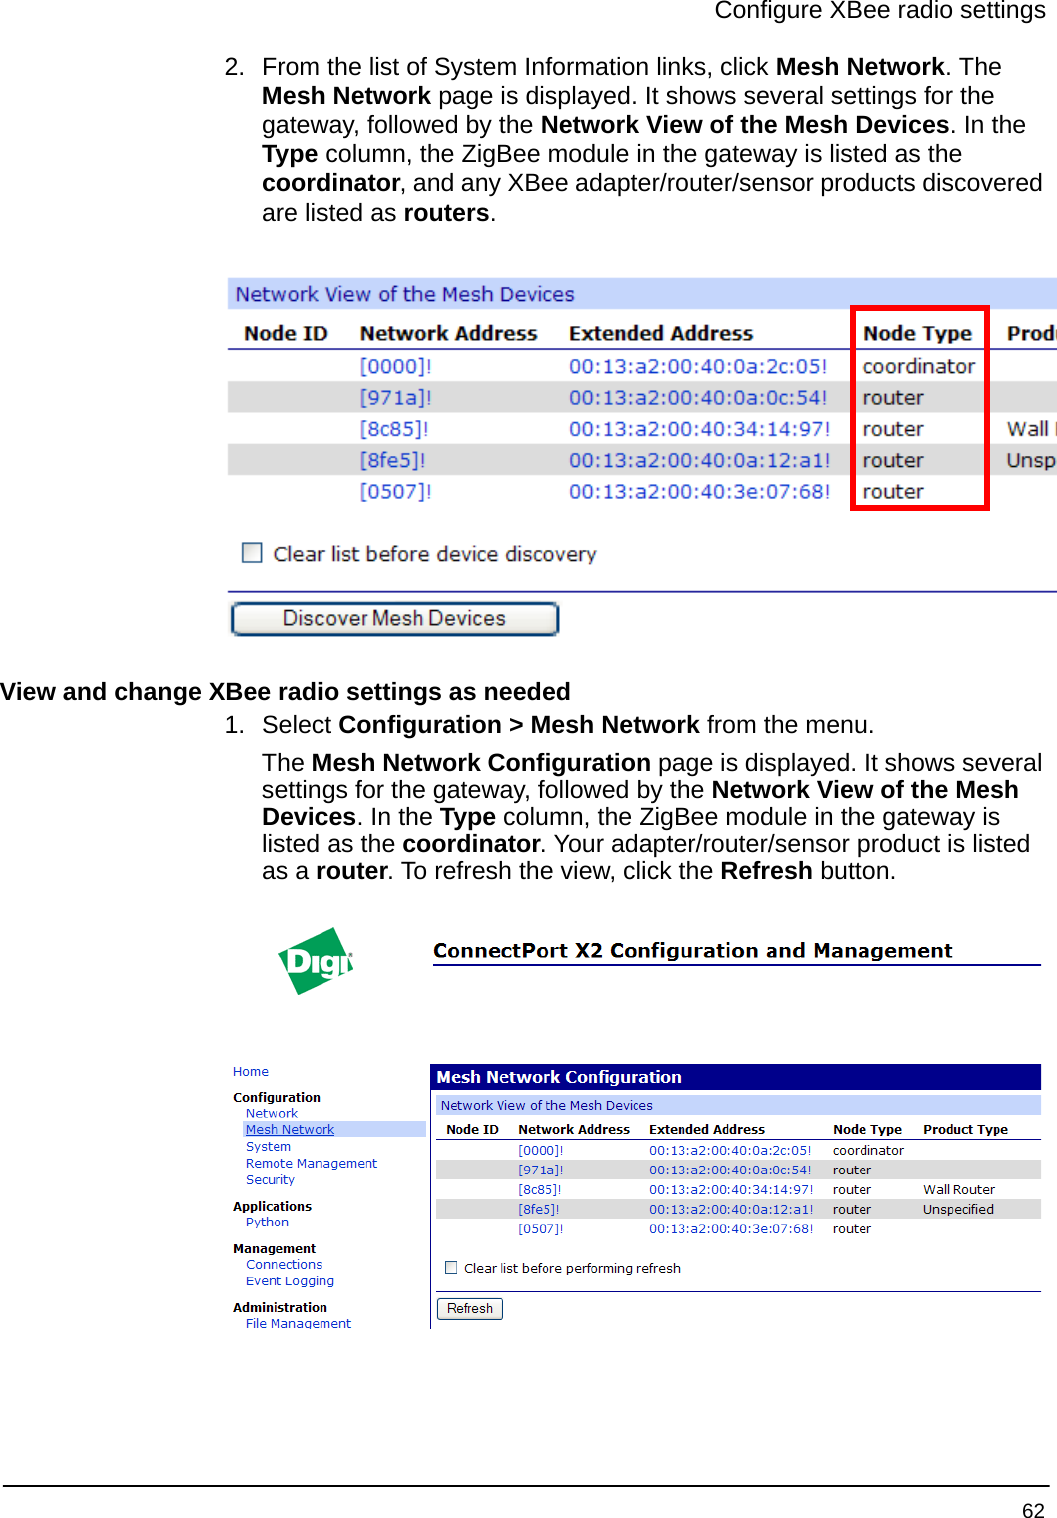 Configure XBee radio settings 622. From the list of System Information links, click Mesh Network. The Mesh Network page is displayed. It shows several settings for the gateway, followed by the Network View of the Mesh Devices. In the Type column, the ZigBee module in the gateway is listed as the coordinator, and any XBee adapter/router/sensor products discovered are listed as routers. View and change XBee radio settings as needed1. Select Configuration &gt; Mesh Network from the menu. The Mesh Network Configuration page is displayed. It shows several settings for the gateway, followed by the Network View of the Mesh Devices. In the Type column, the ZigBee module in the gateway is listed as the coordinator. Your adapter/router/sensor product is listed as a router. To refresh the view, click the Refresh button. 